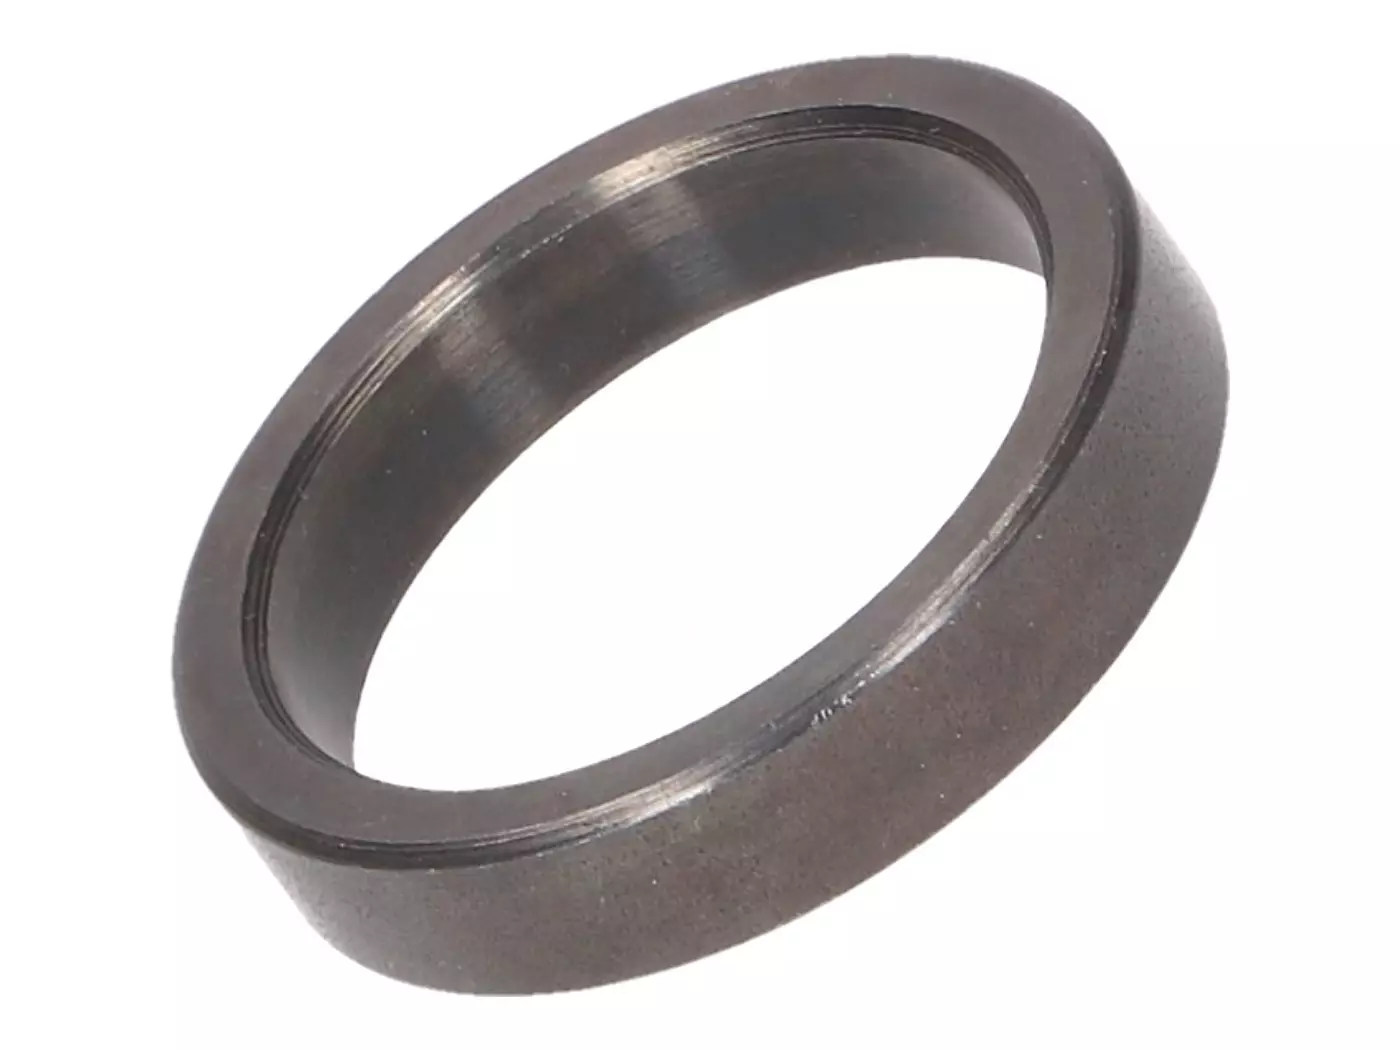 Variator Limiter Ring / Restrictor Ring 5mm For Piaggio, China 4T, Kymco, SYM